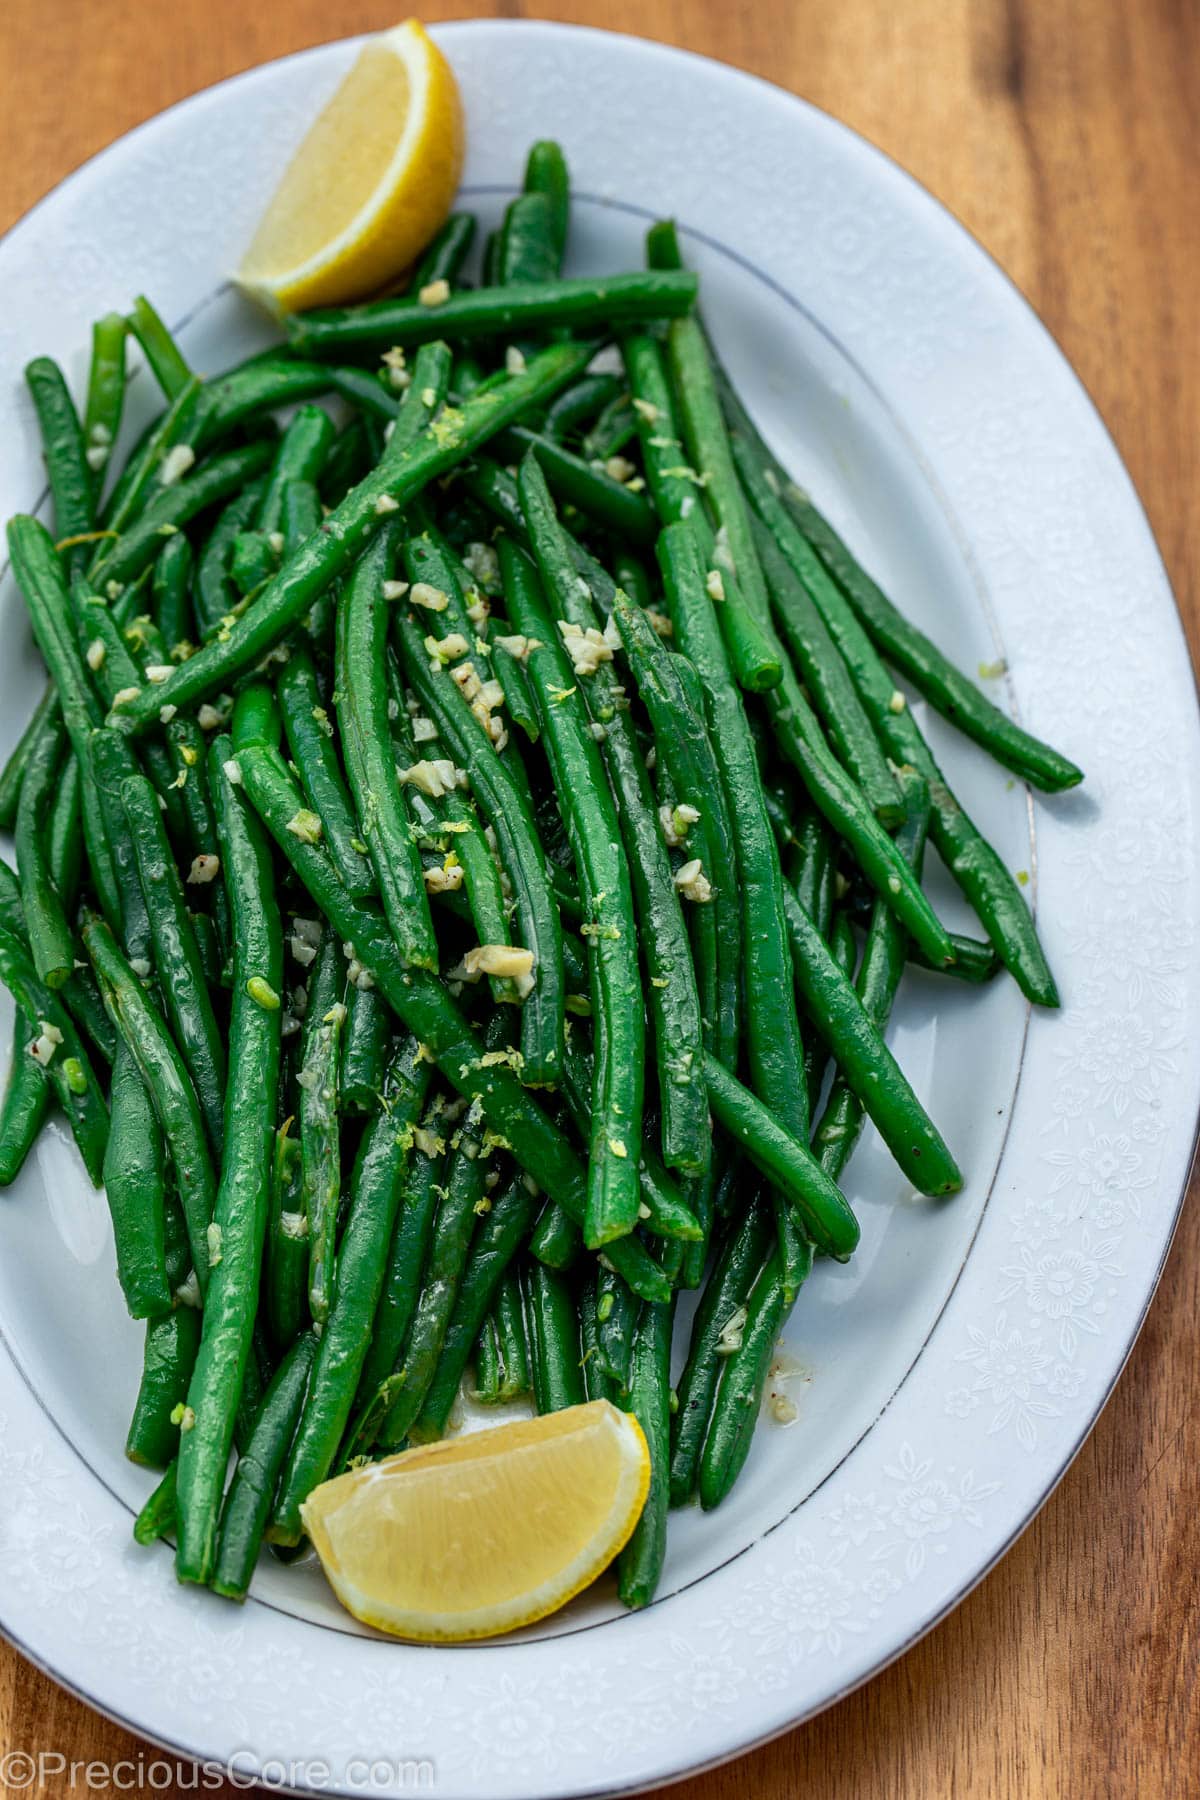 Garlic butter green beans on tray with lemon juice.